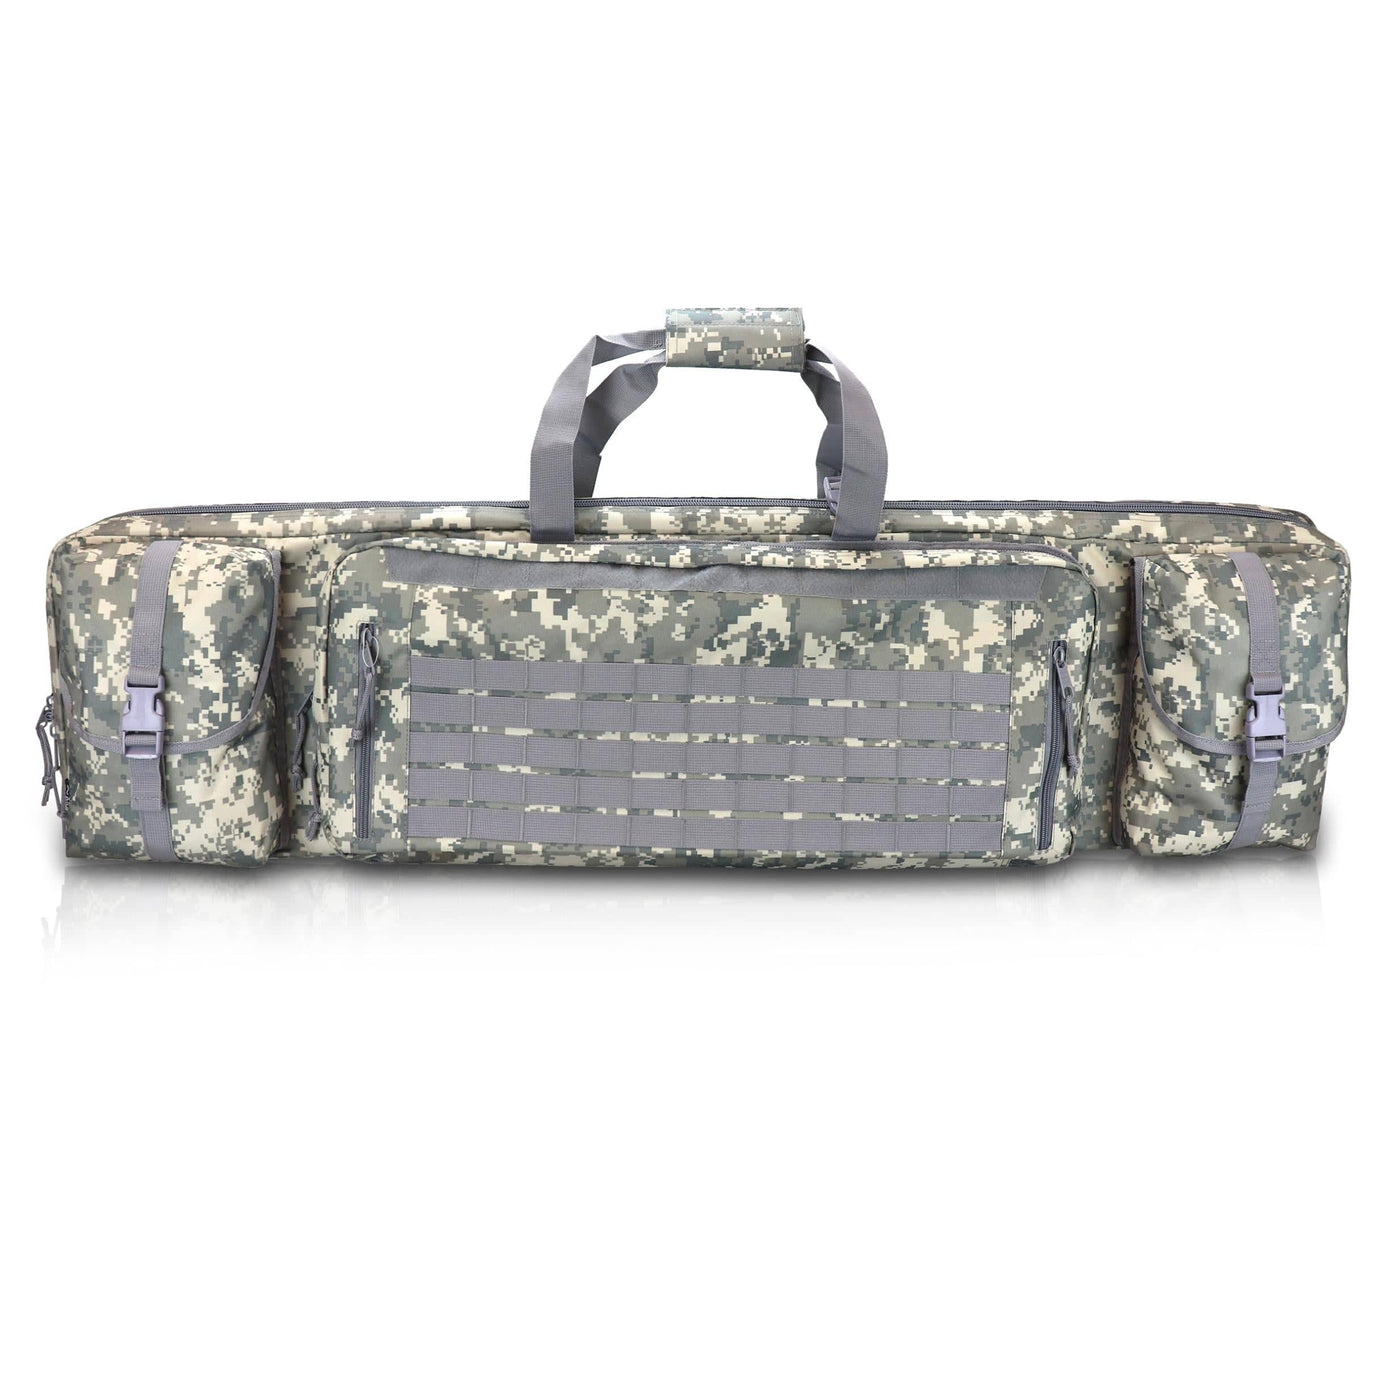 Osage River Osage River 55 in Double Rifle Case ACU Digital Camo Shooting